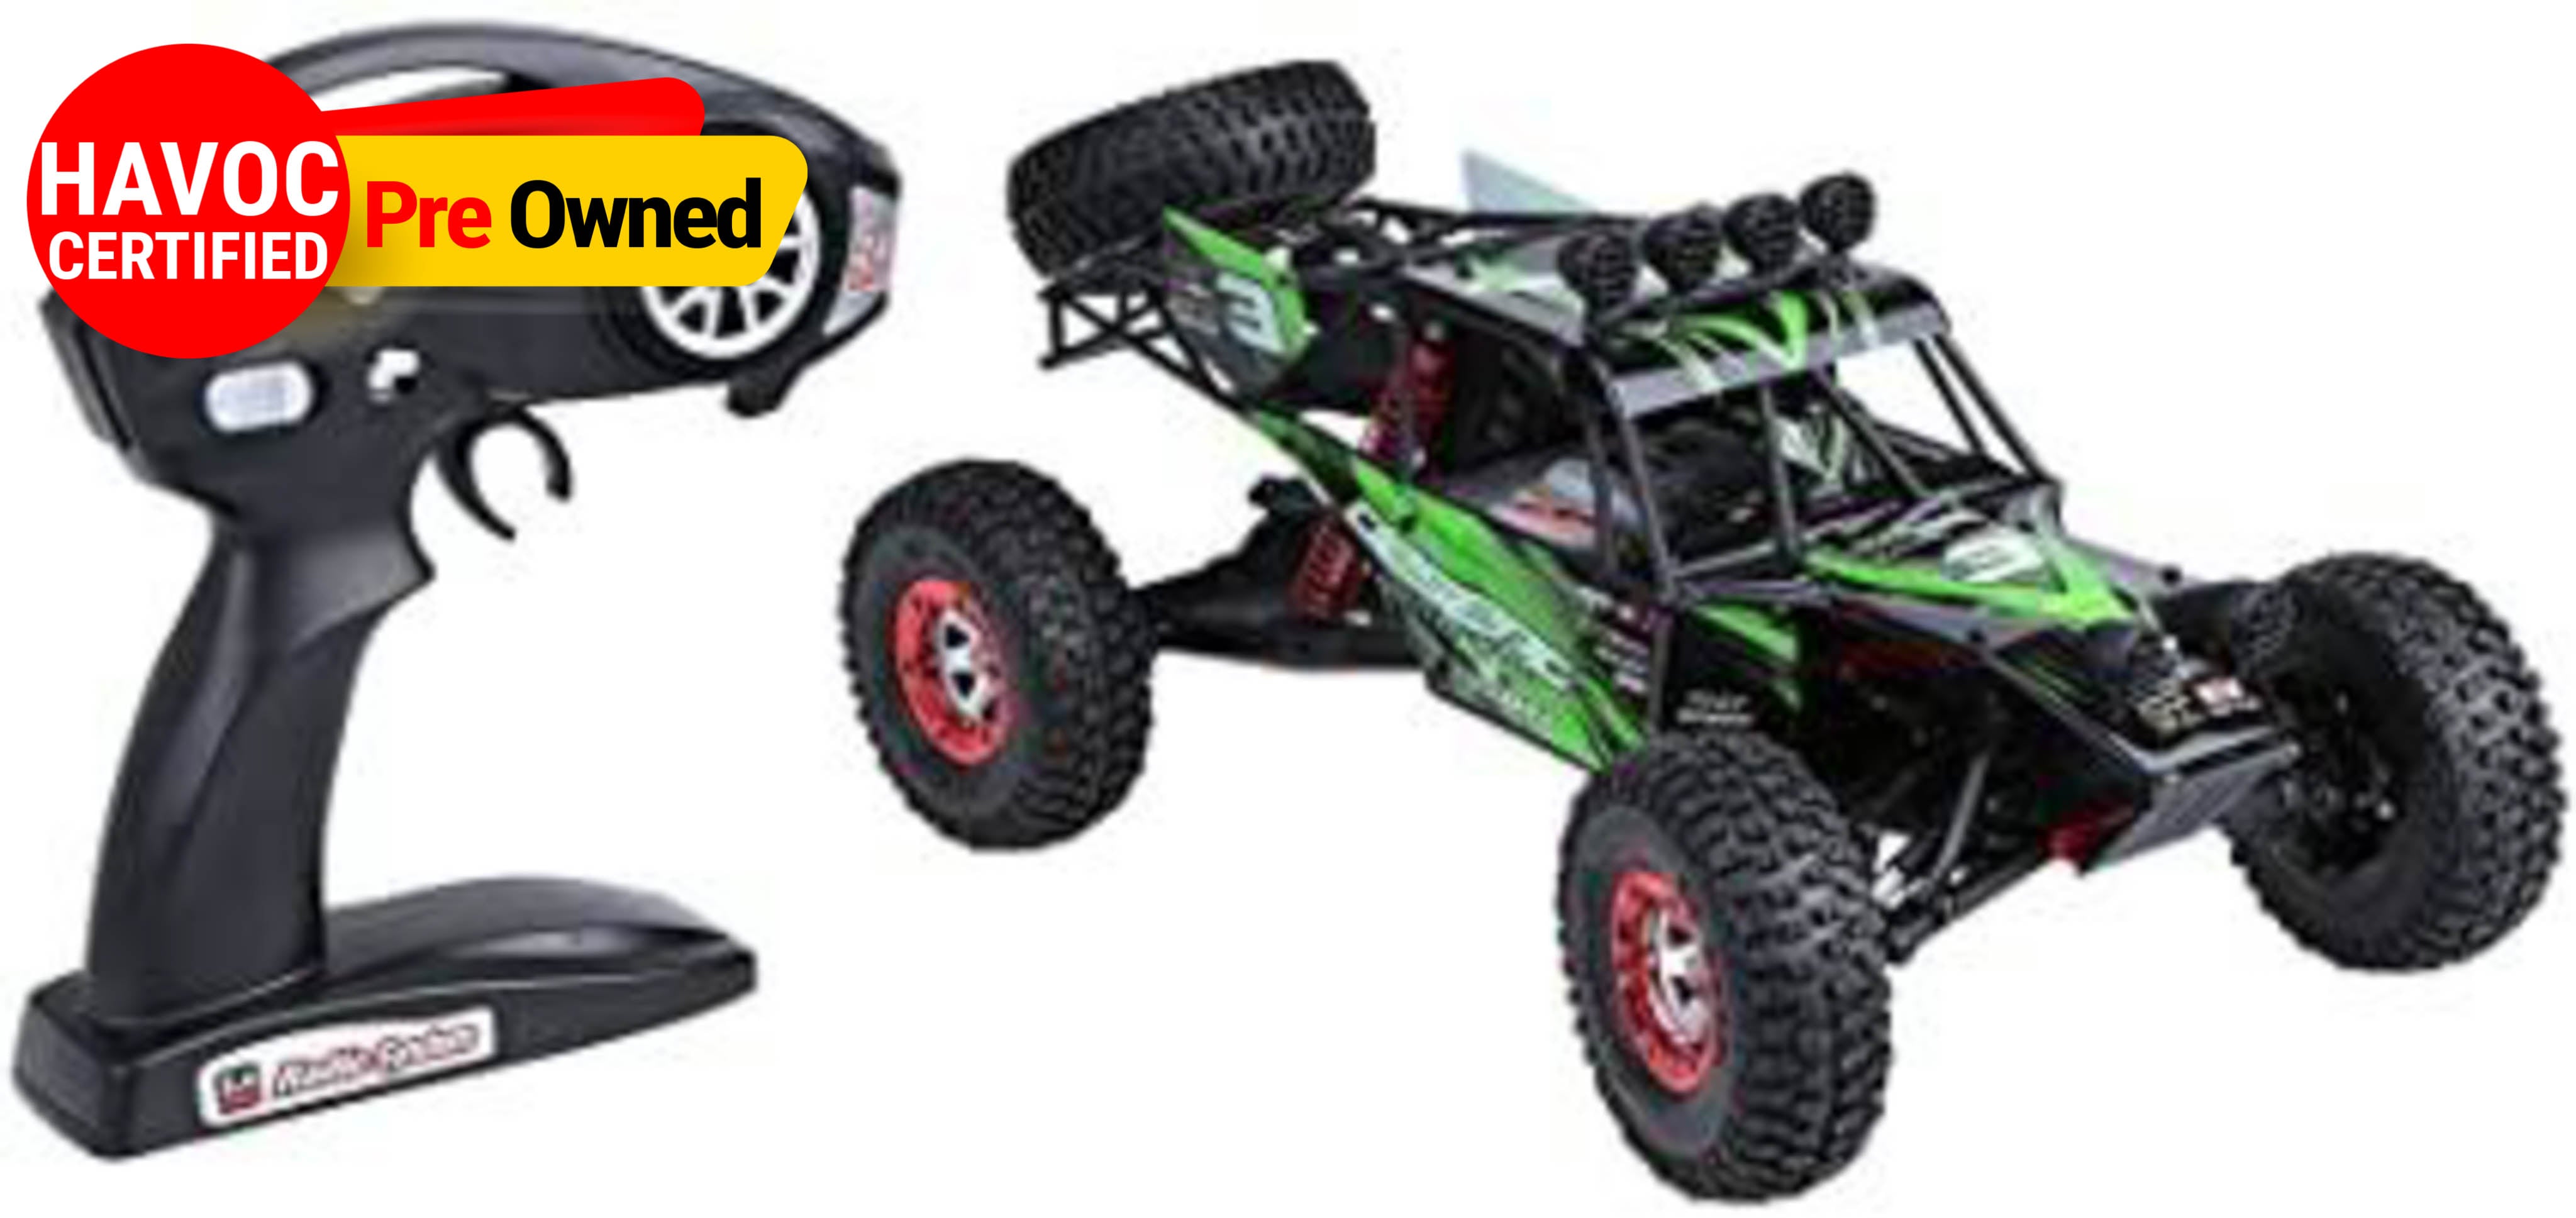 Rc Car Feiyue Fy-03 Eagle-3 1:12 4Wd 2.4G Full Scale Desert Off-Road (Quality Pre Owned)